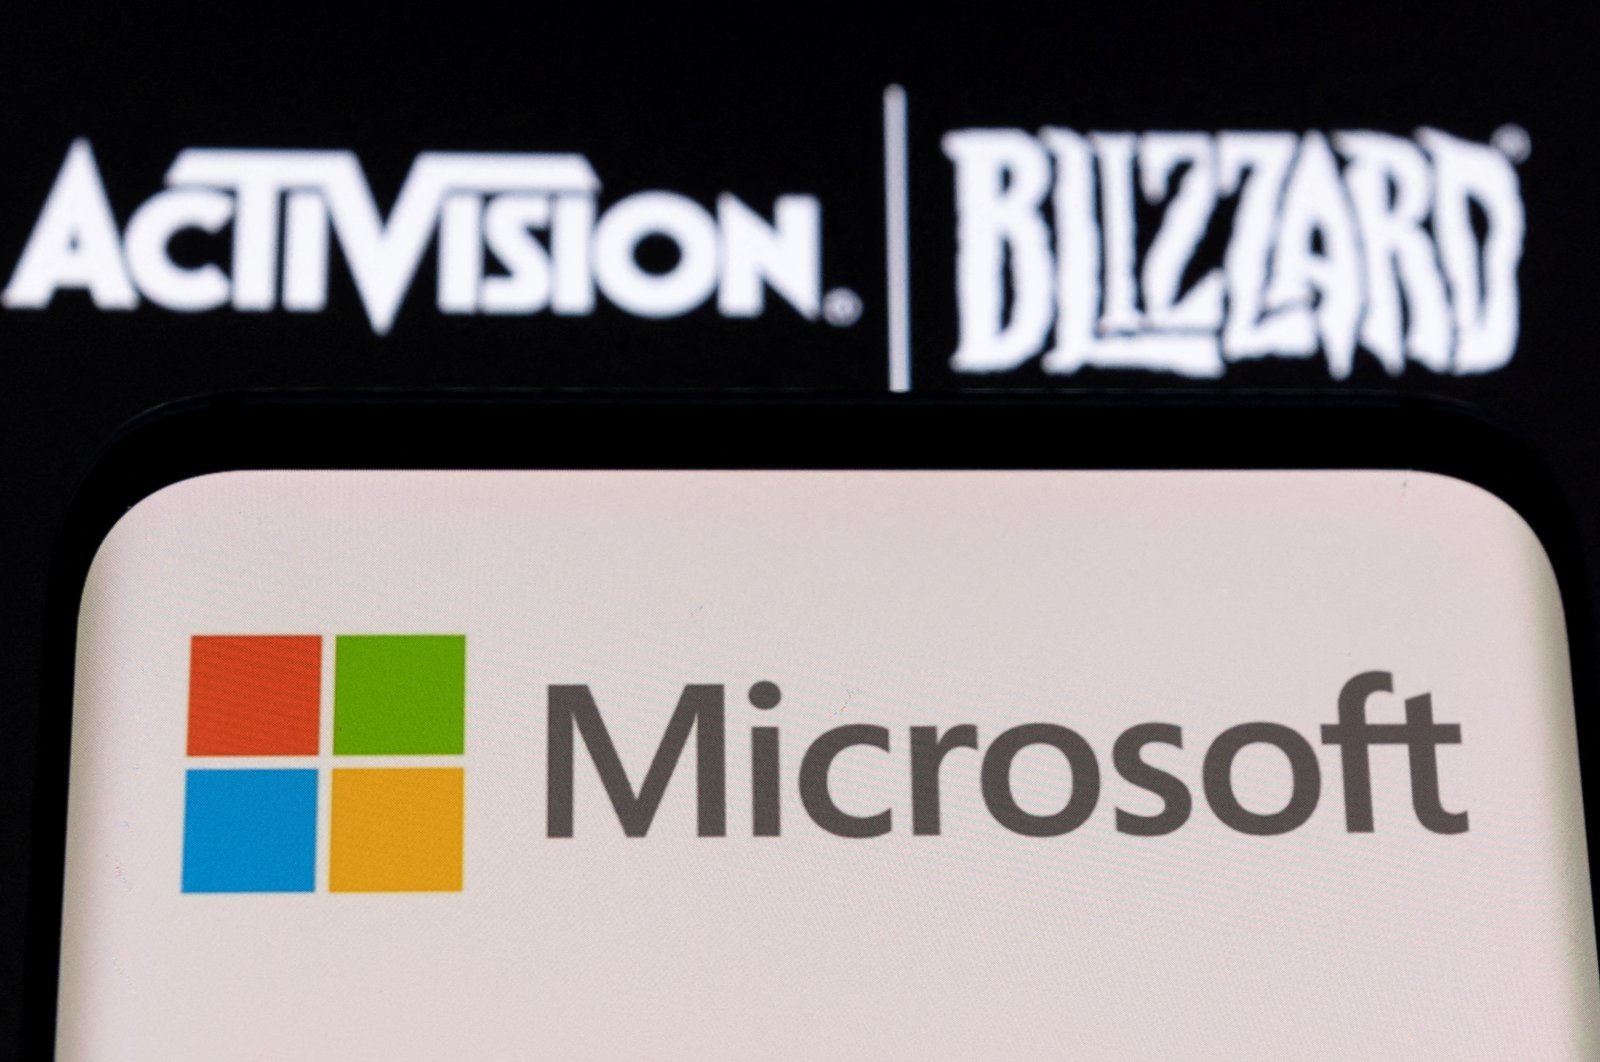 Microsoft logo is seen on a smartphone placed on displayed Activision Blizzard logo in this illustration taken Jan. 18, 2022. (Reuters Photo)